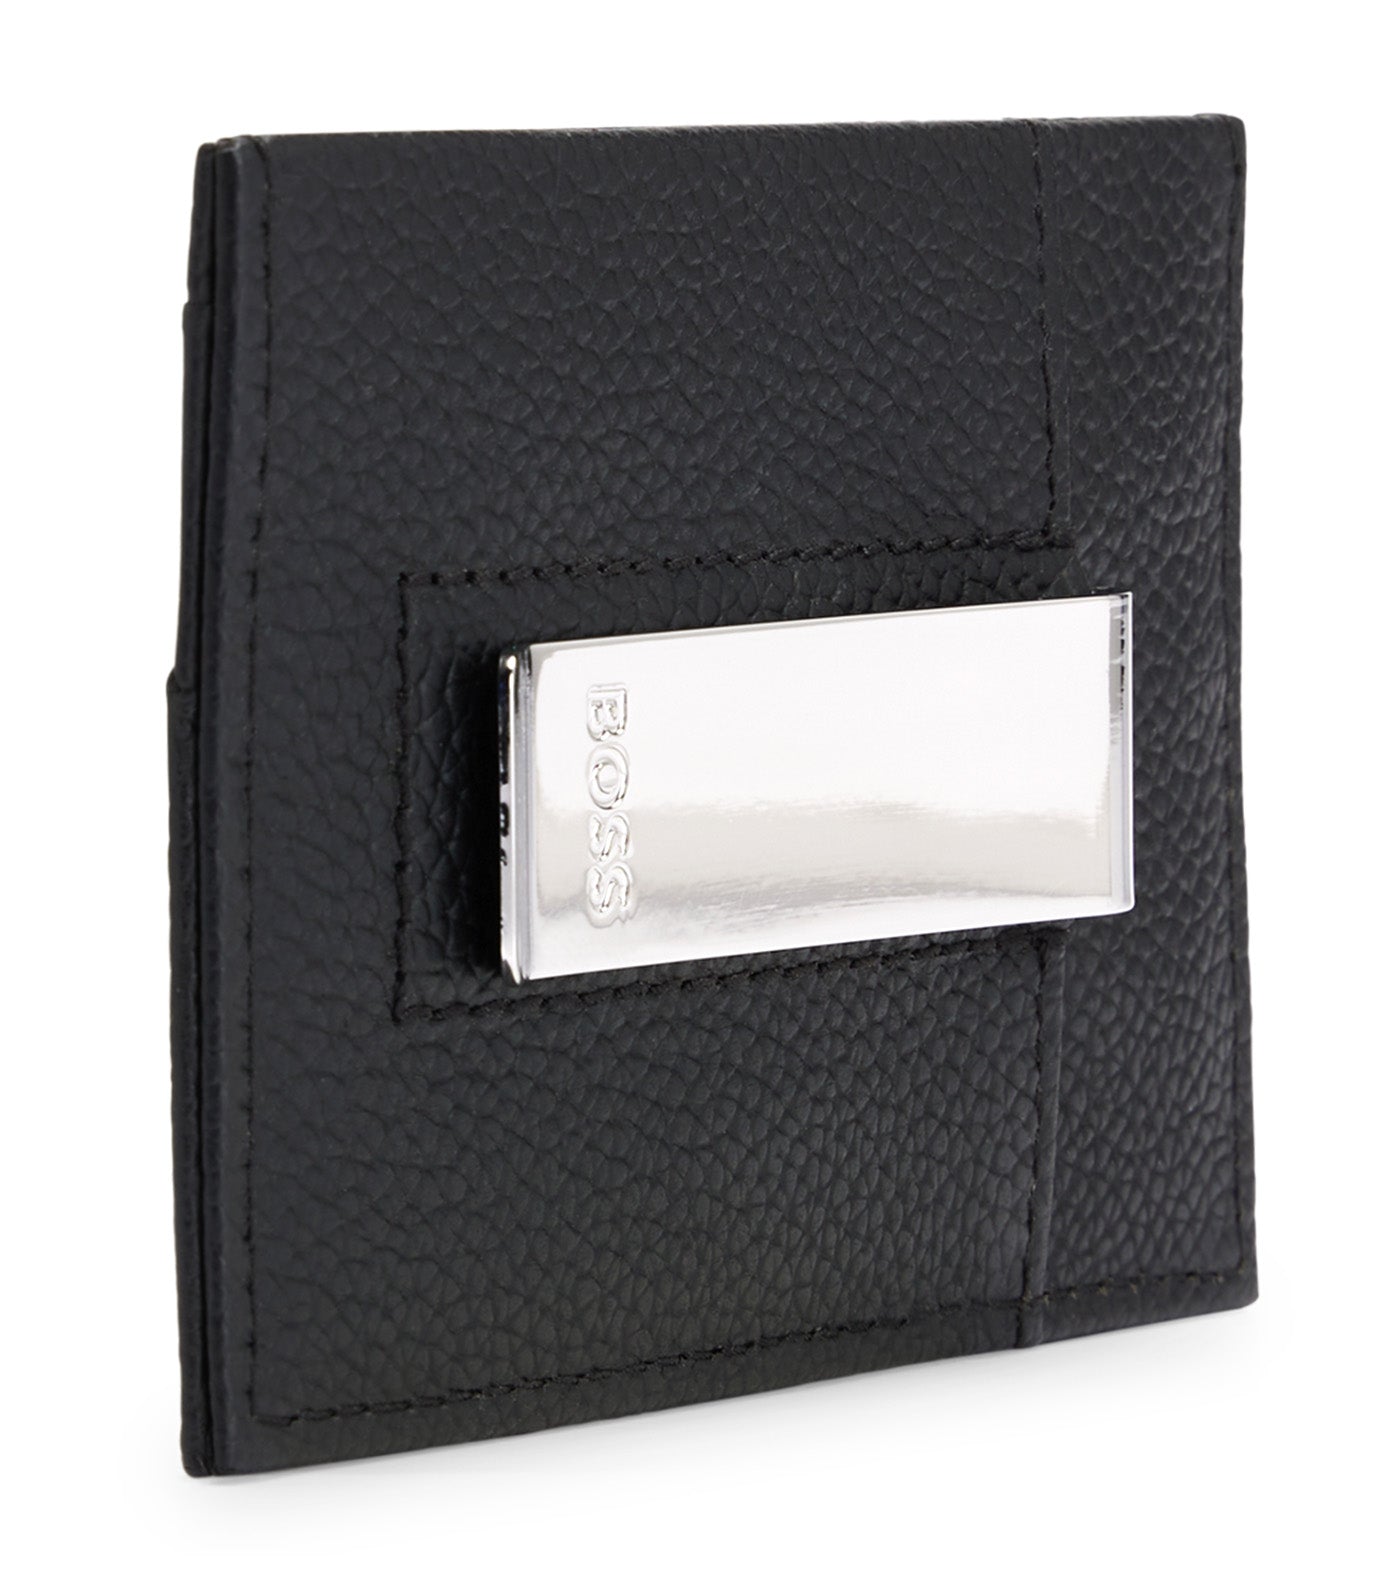 Brass Money Clip with Card Holder in Grained Leather Black